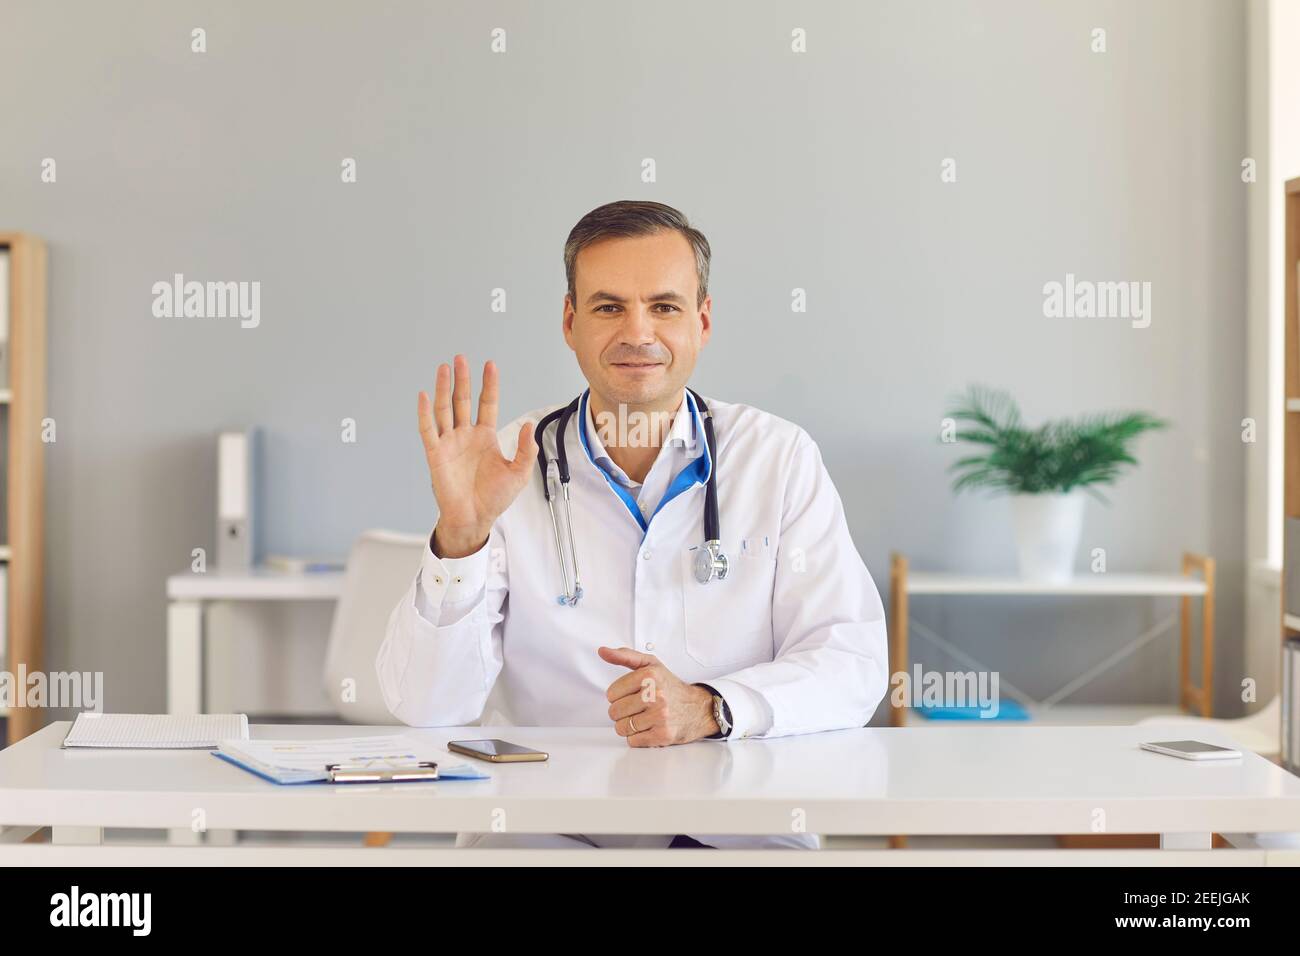 Male doctor waves his hand greeting his viewers starting an online broadcast in a hospital office. Stock Photo